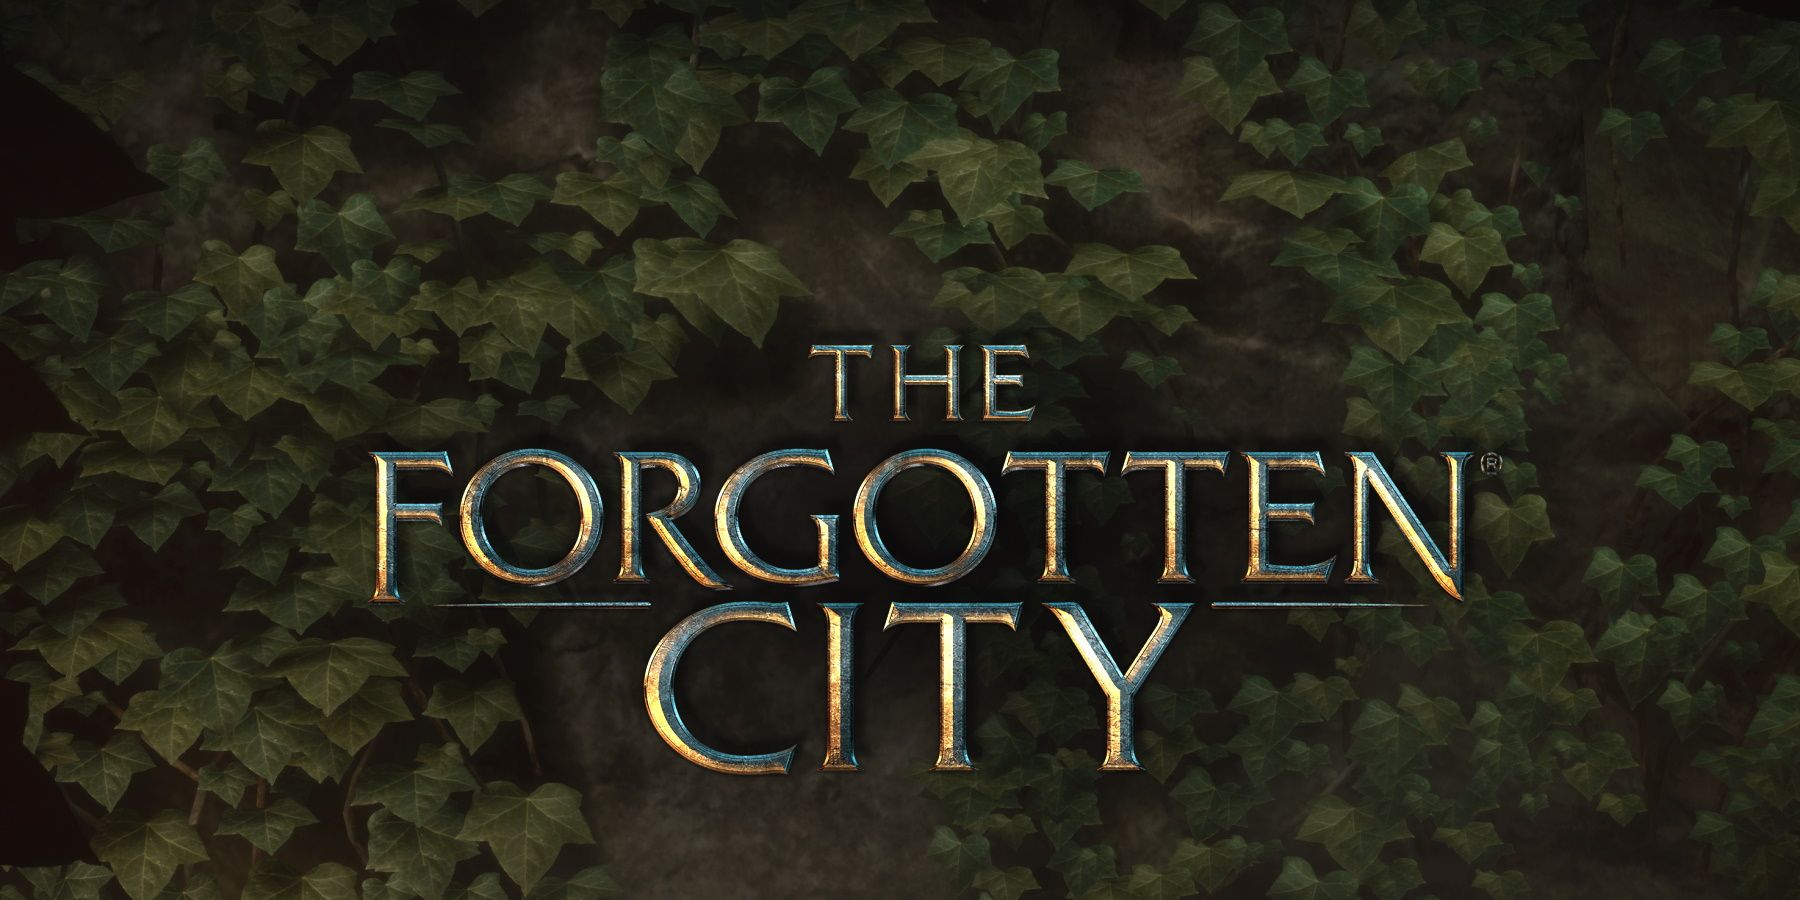 The Forgotten City title card